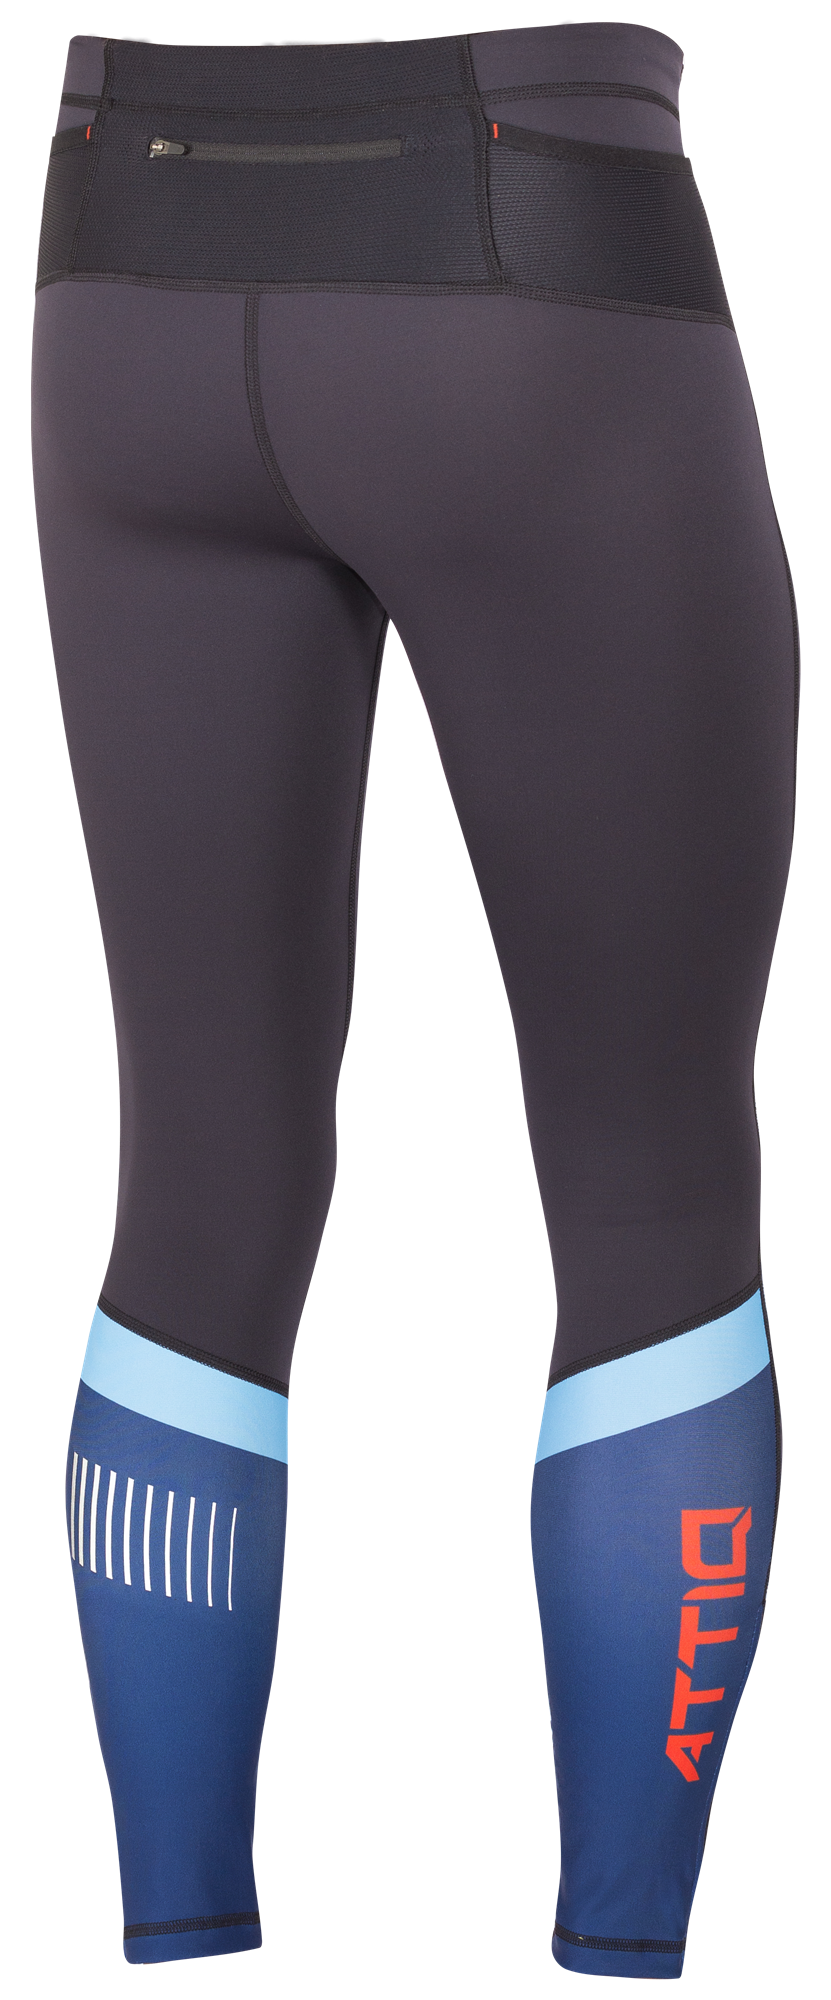 WOMEN'S VERTICAL COMPRESSION TIGHTS